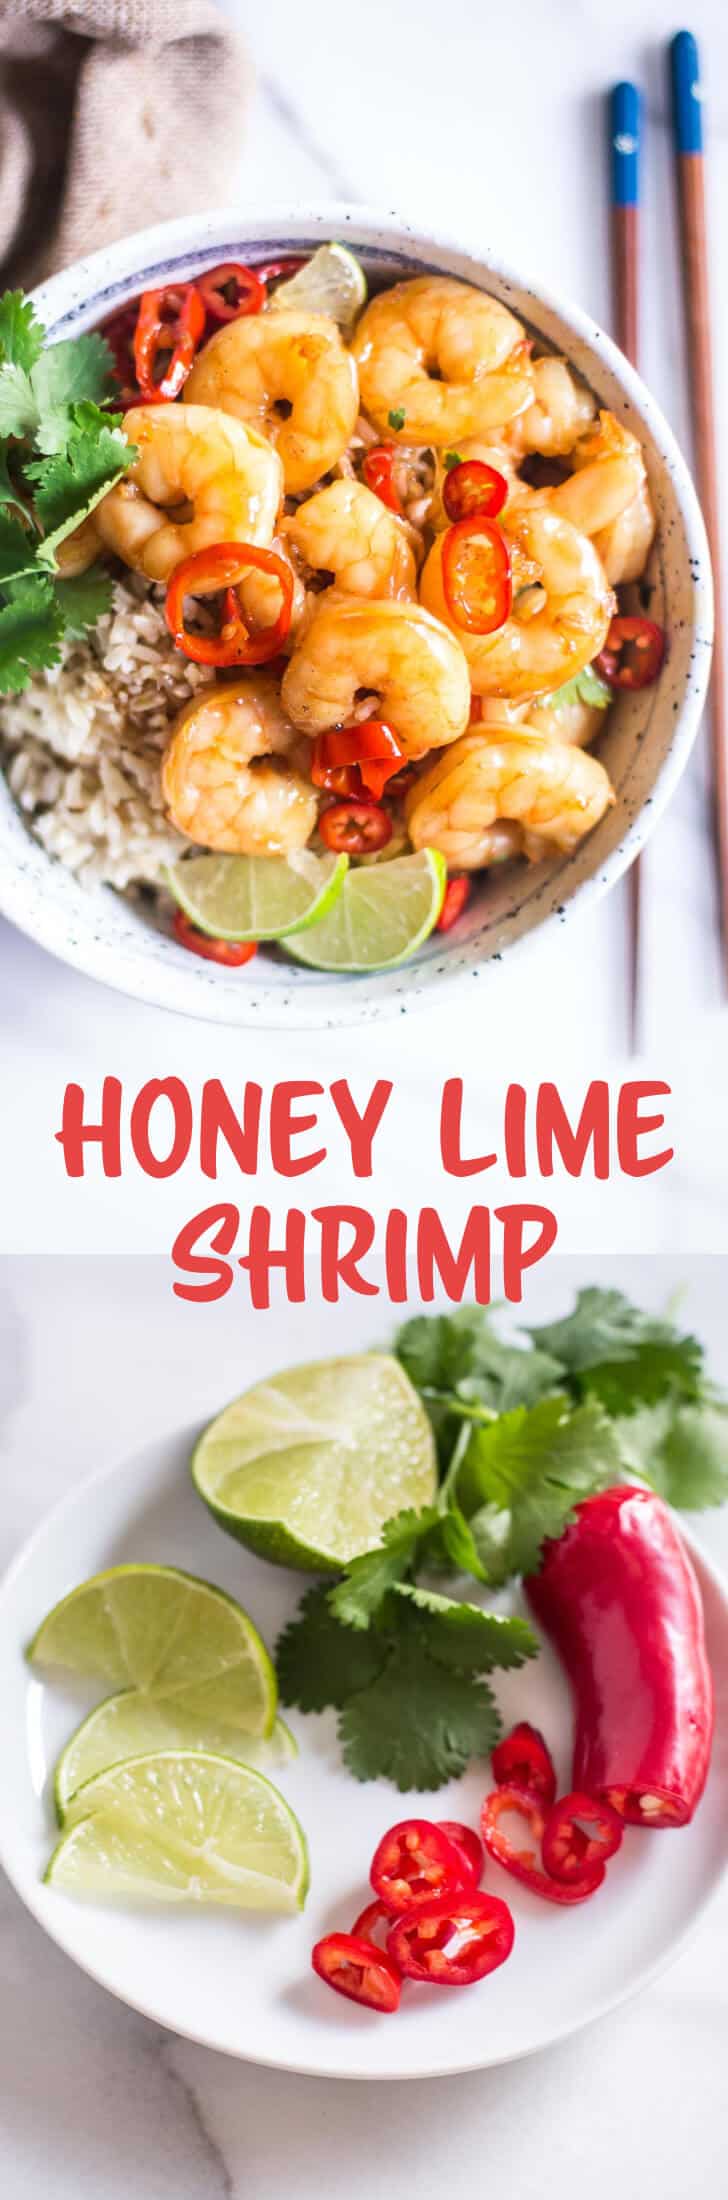 Honey Lime Shrimp - A sweet and savory sauce coats shrimp in this super fast dinner that comes together in under 15 minutes. Enjoy the shrimp in rice bowls, tacos or salads!